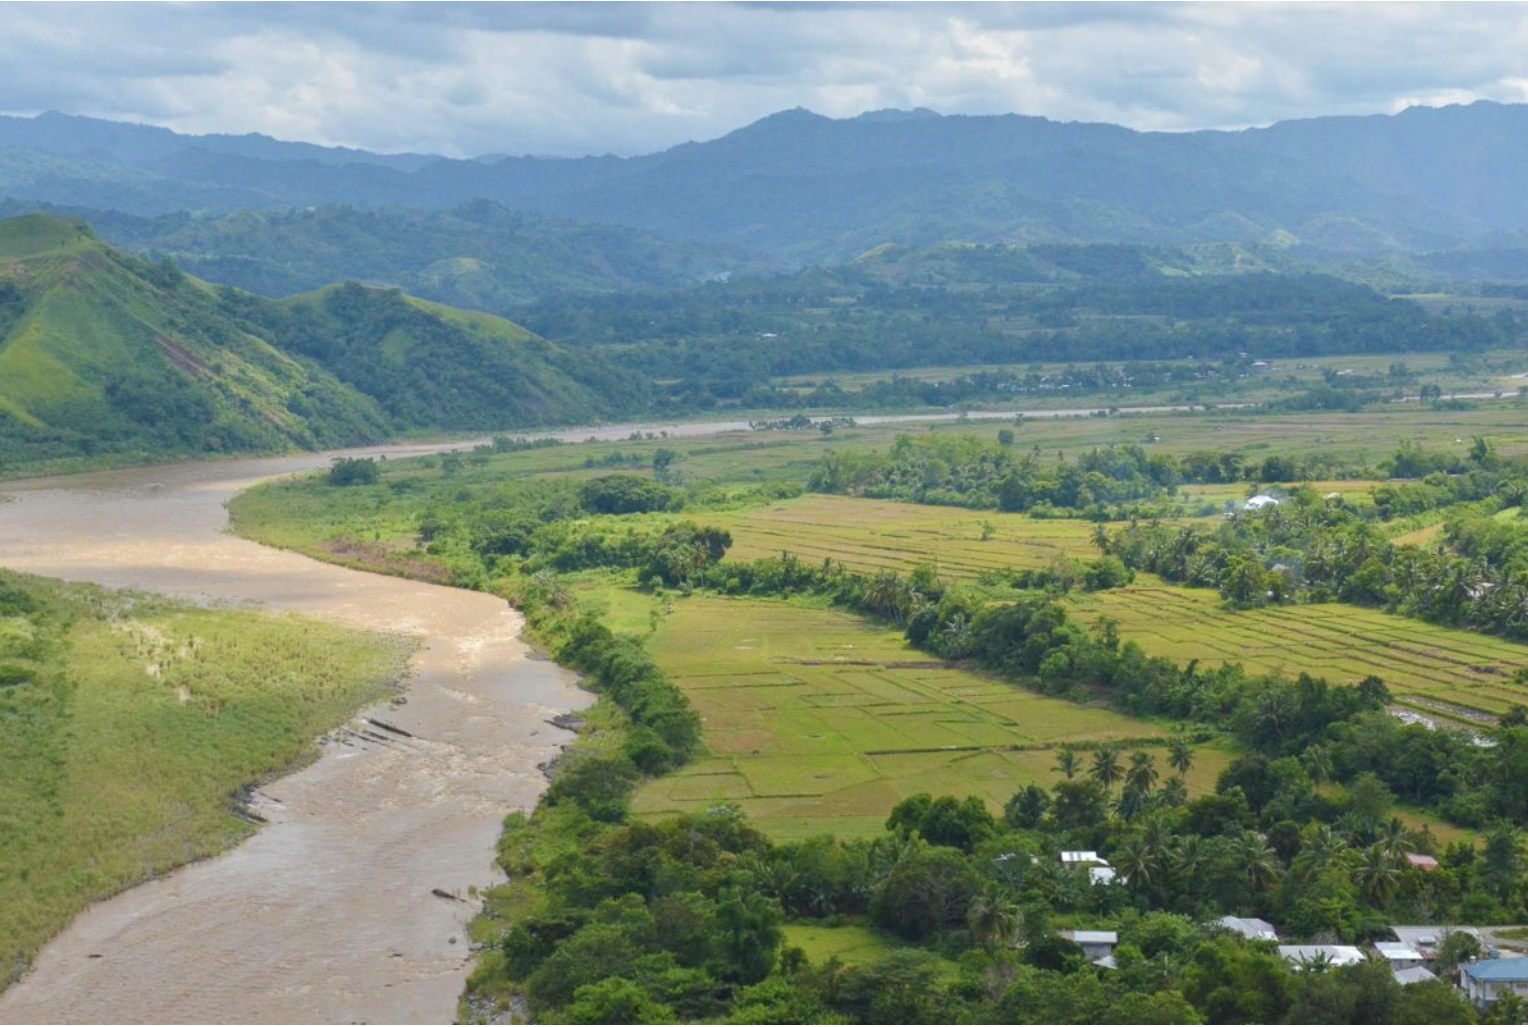 The Chico River is the longest tributary of the Rio Grande de Cagayan, or the Cagayan River, the longest river in the Philippines. Image by Erwin Mascariñas